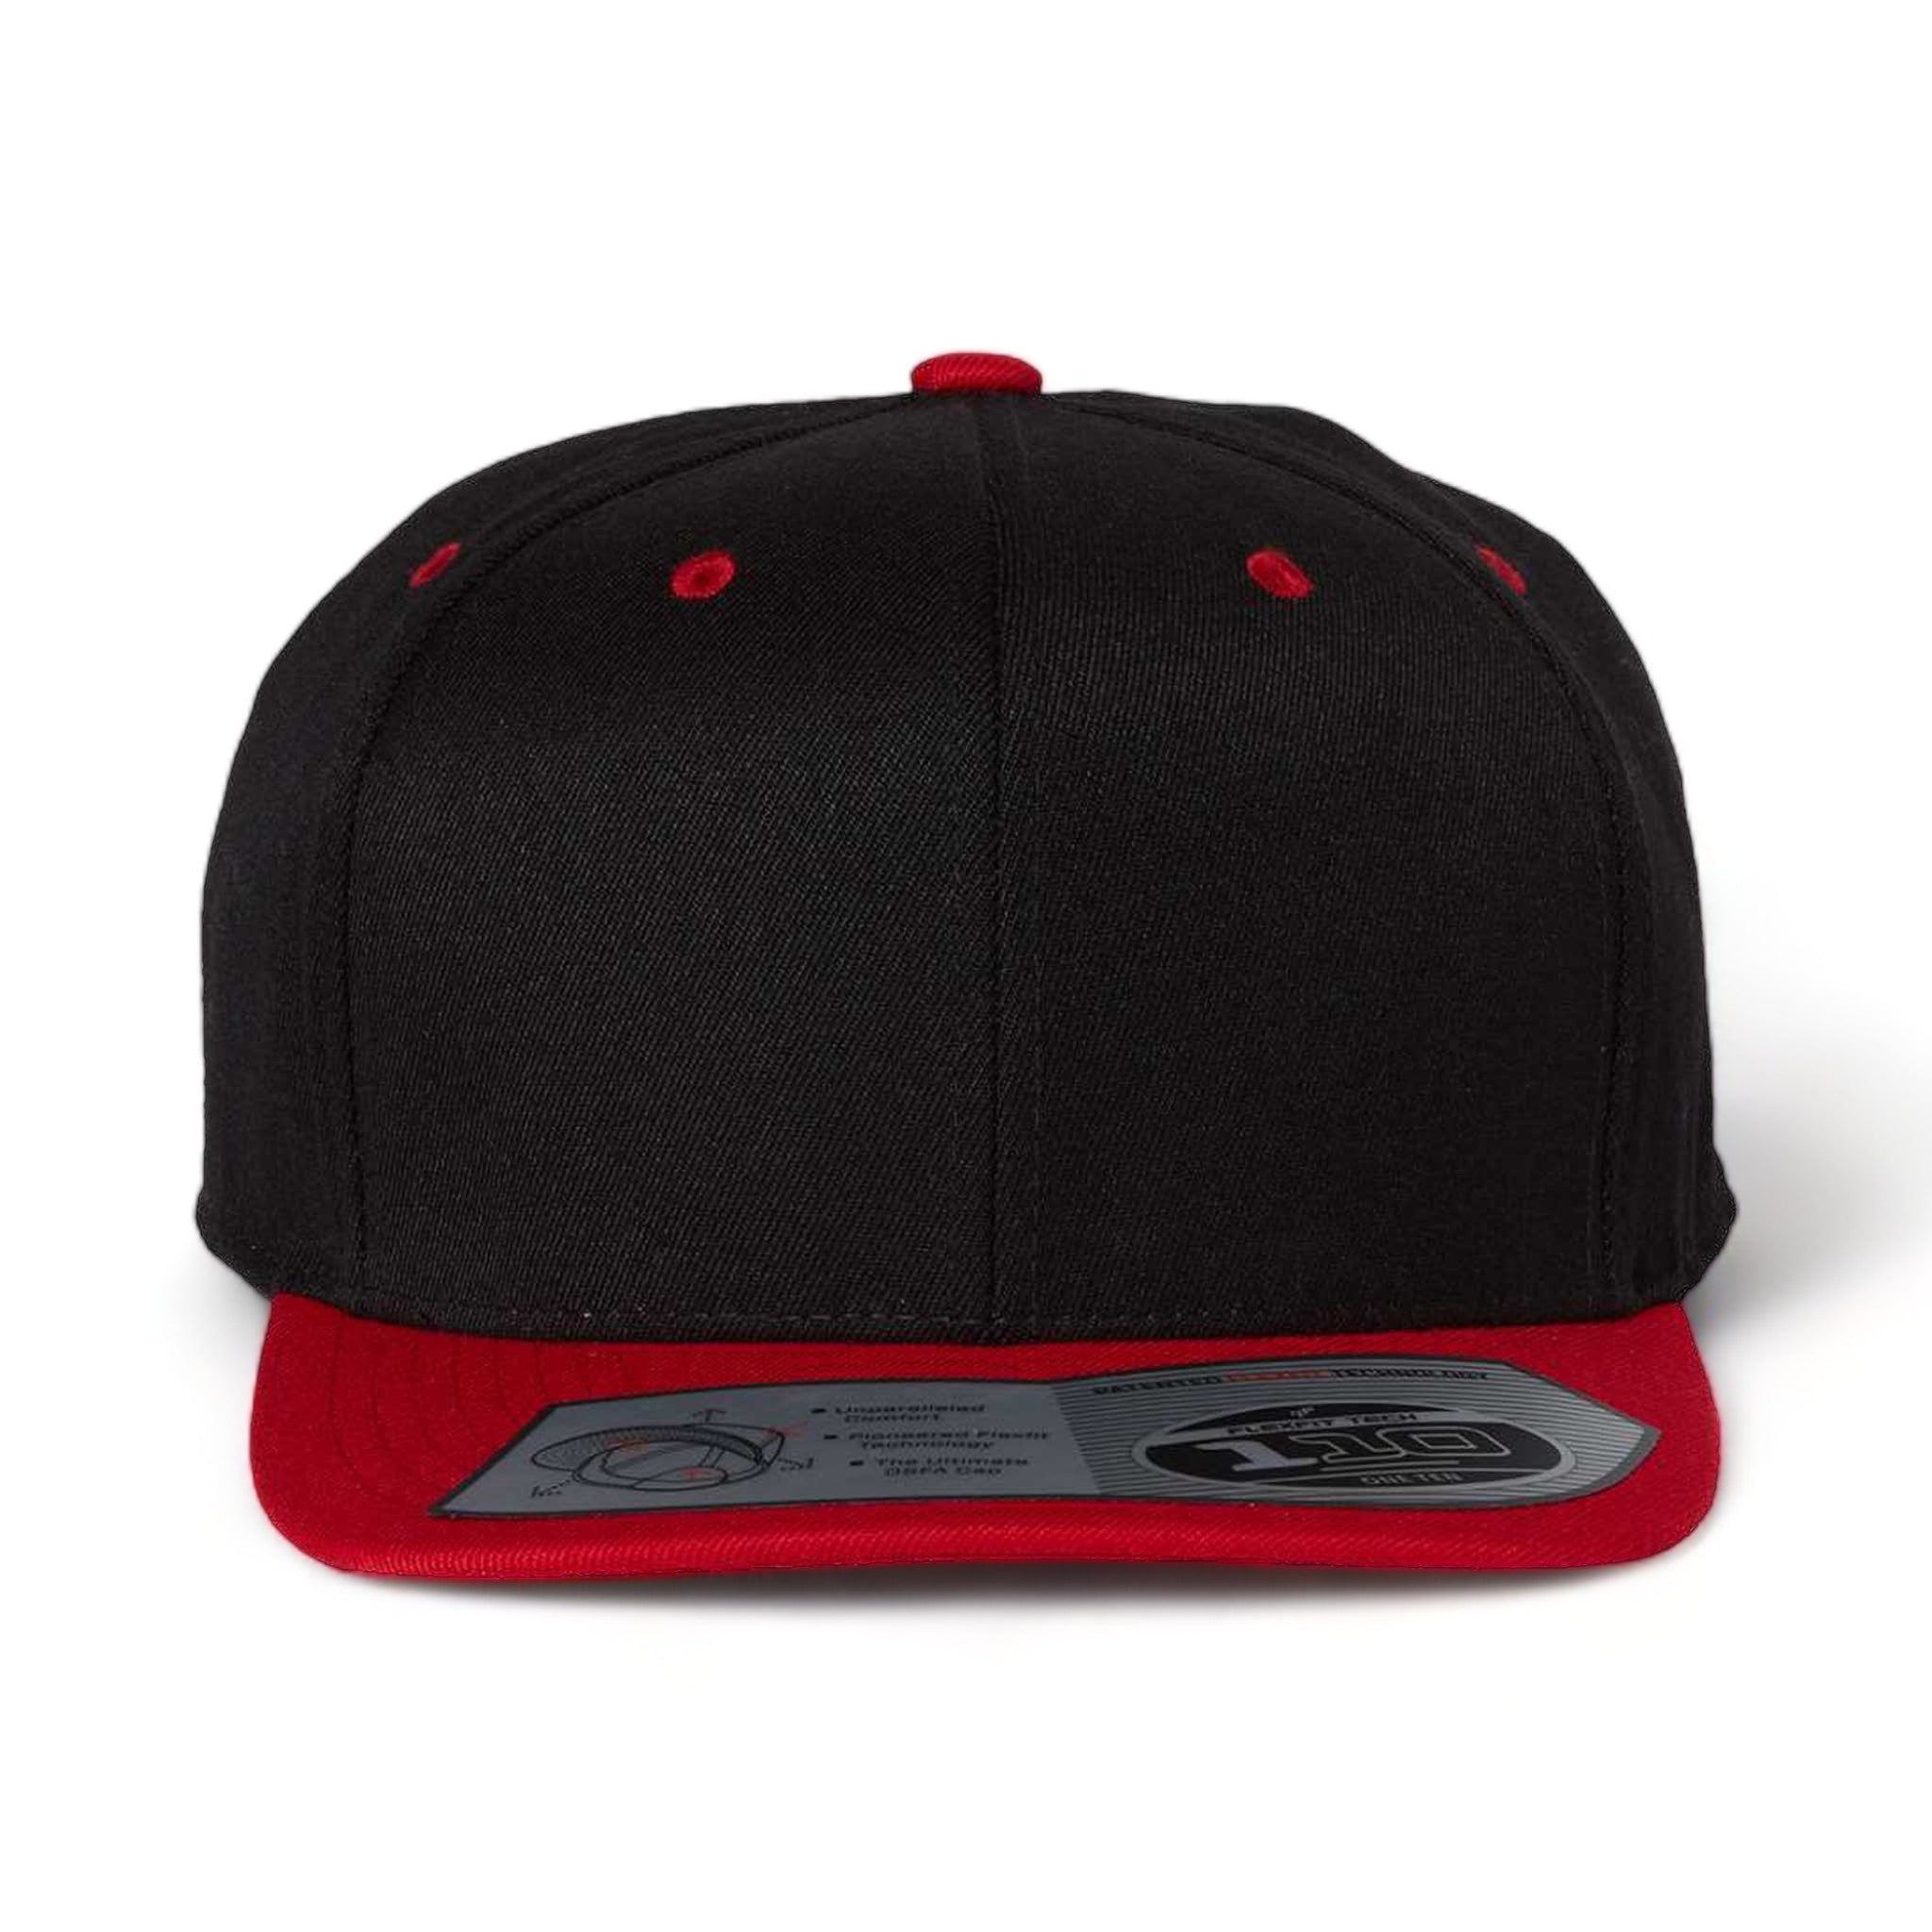 Front view of Flexfit 110F custom hat in black and red